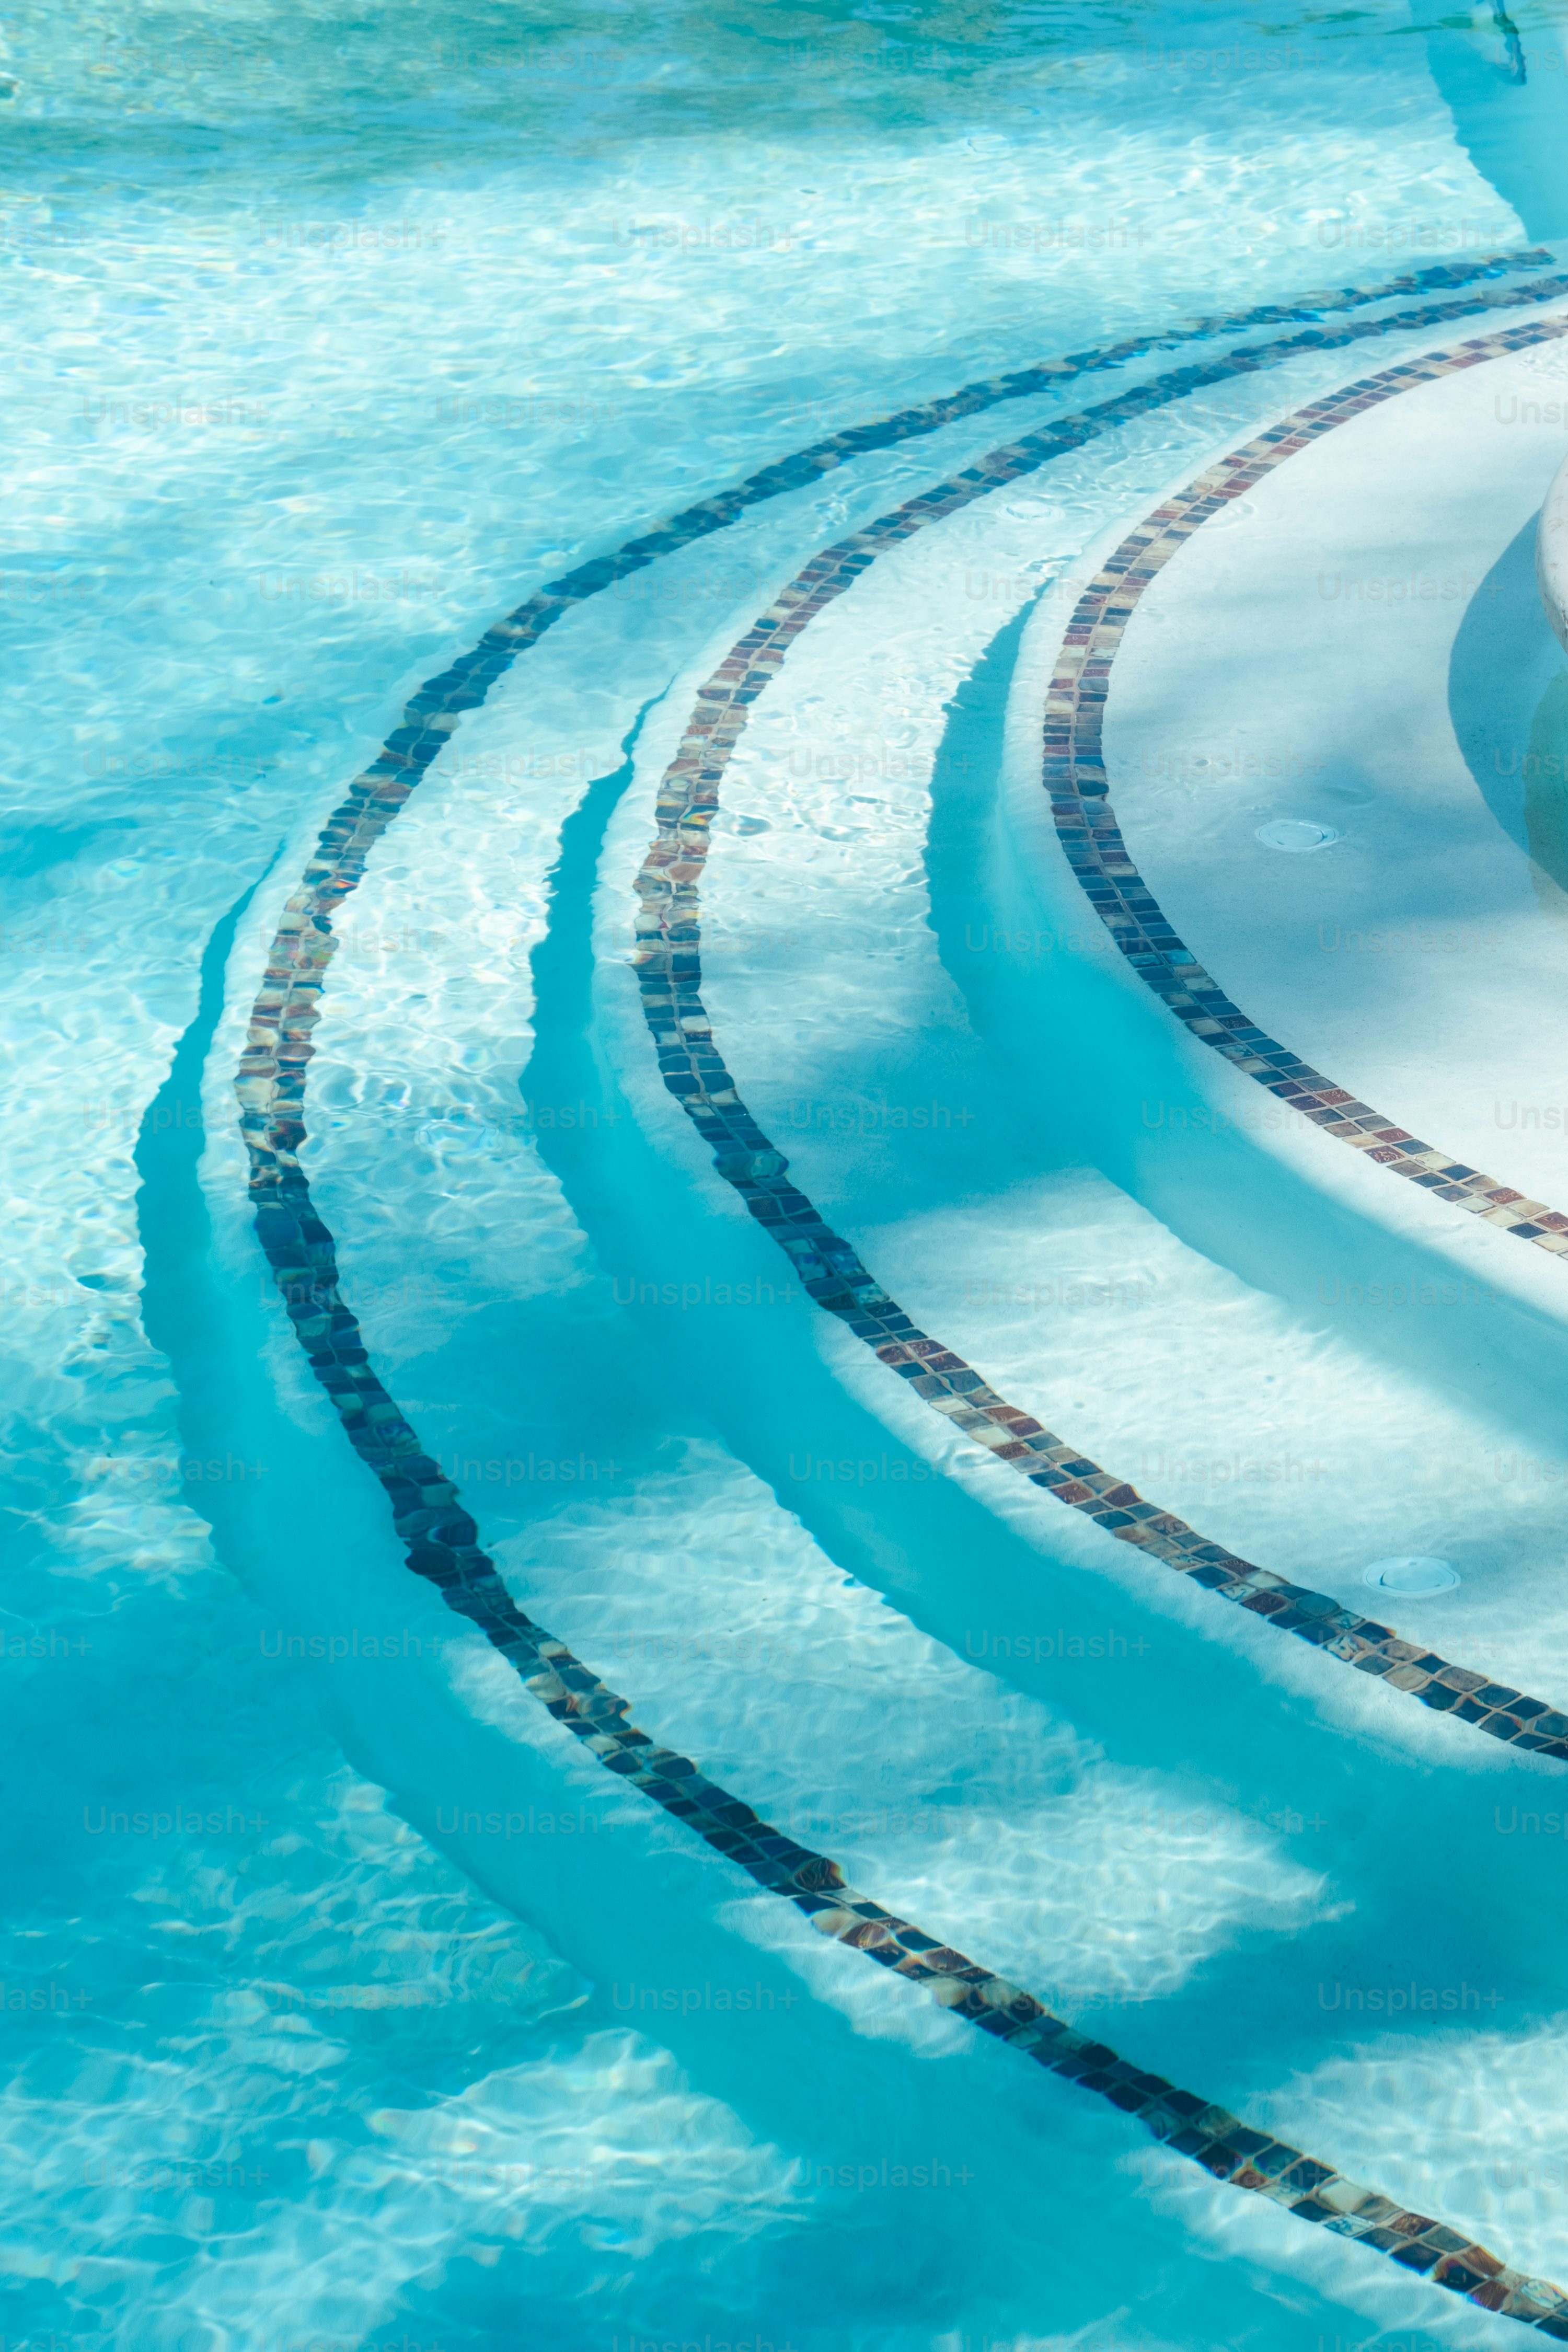 Olympic Pool Picture. Download Free